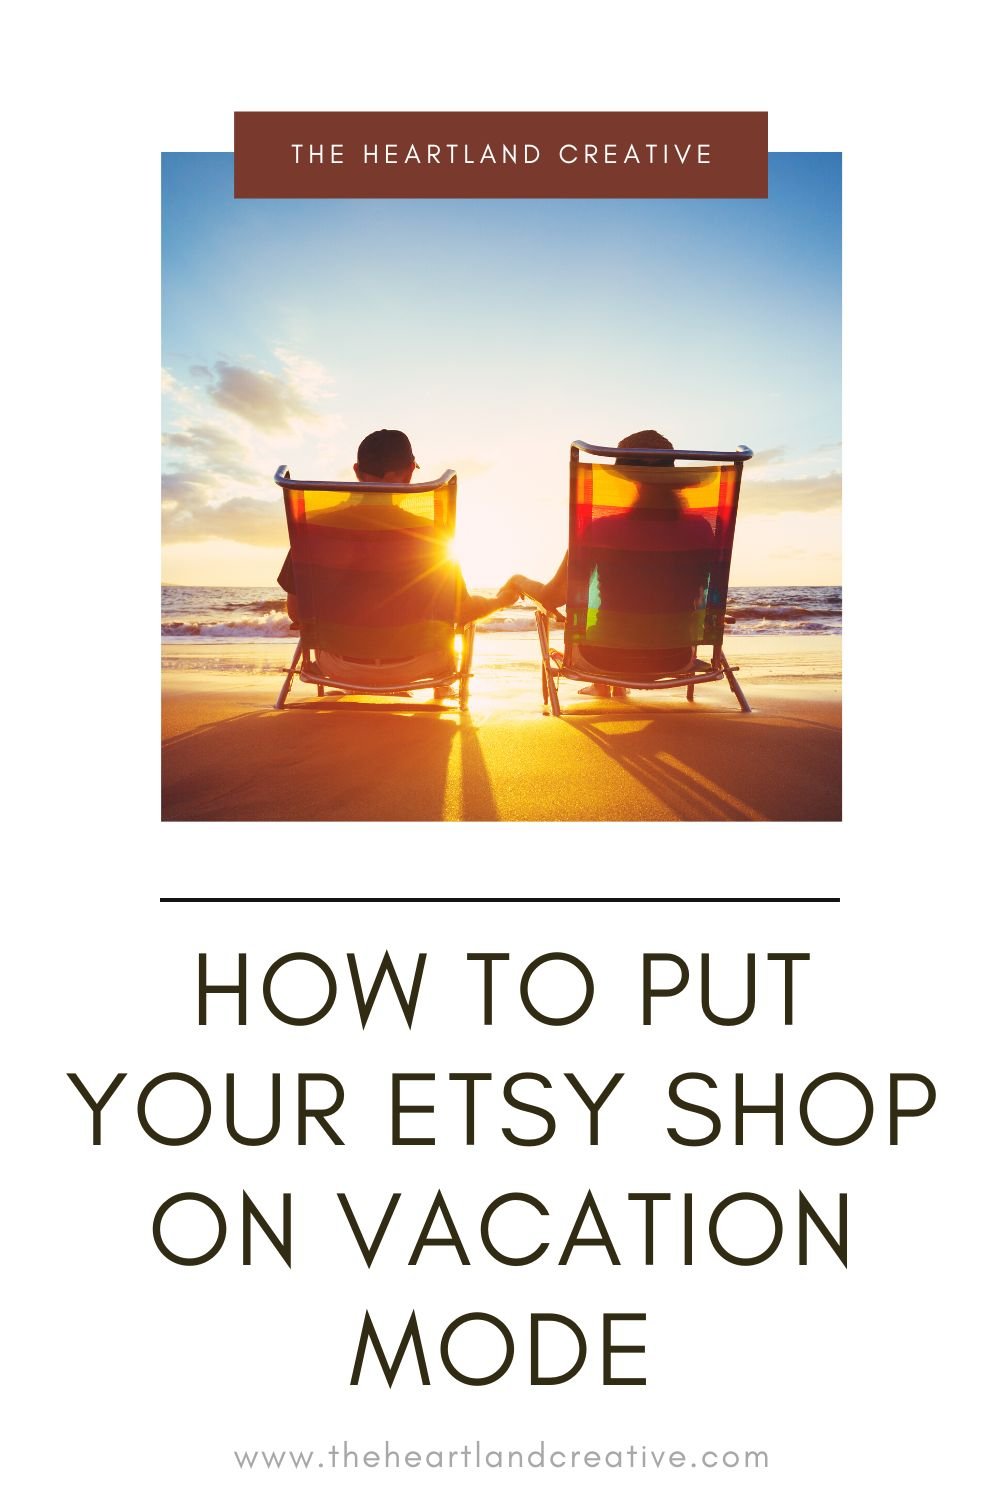 How to put your Etsy shop on Vacation Mode - Sarah Waggoner - Etsy Shop Coach